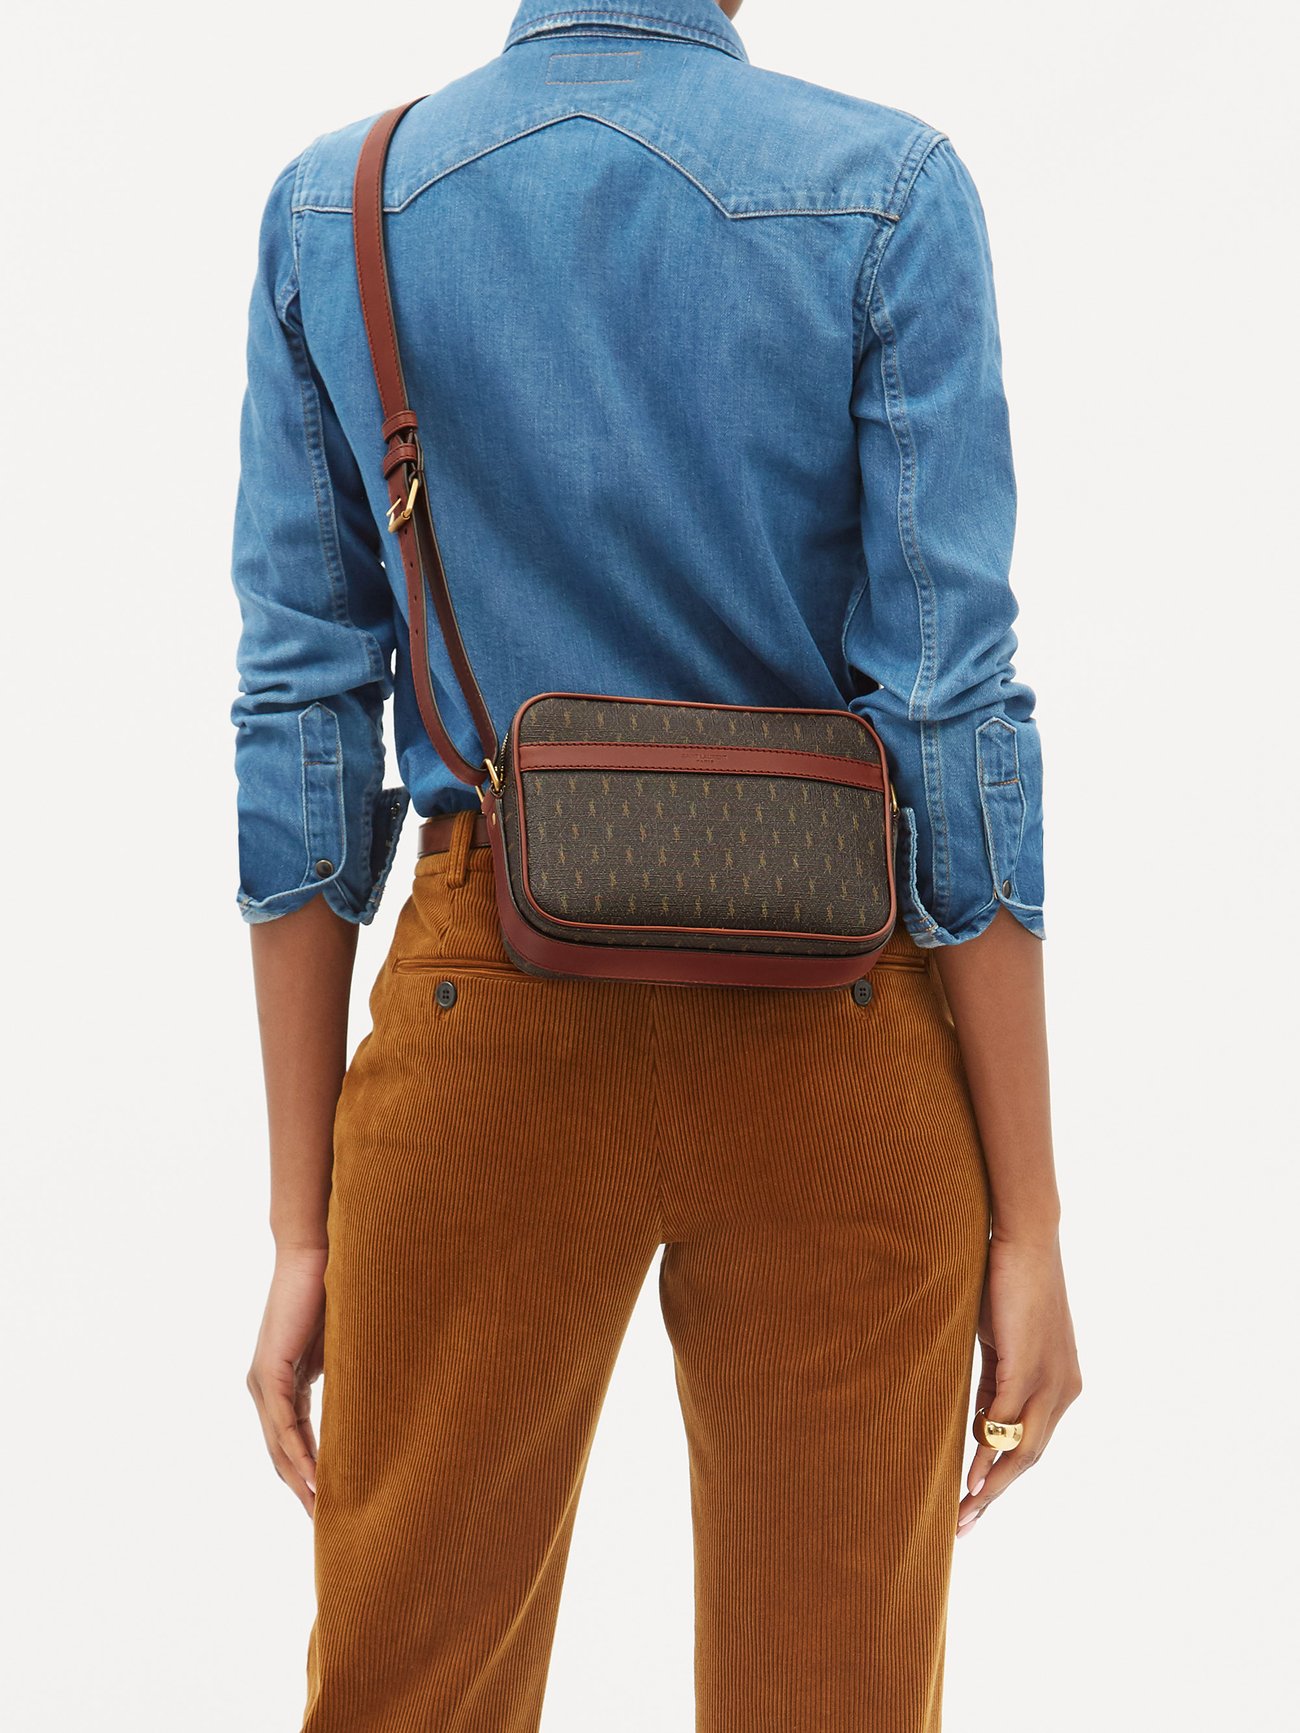 le monogramme crossbody bag in monogram canvas and smooth leather